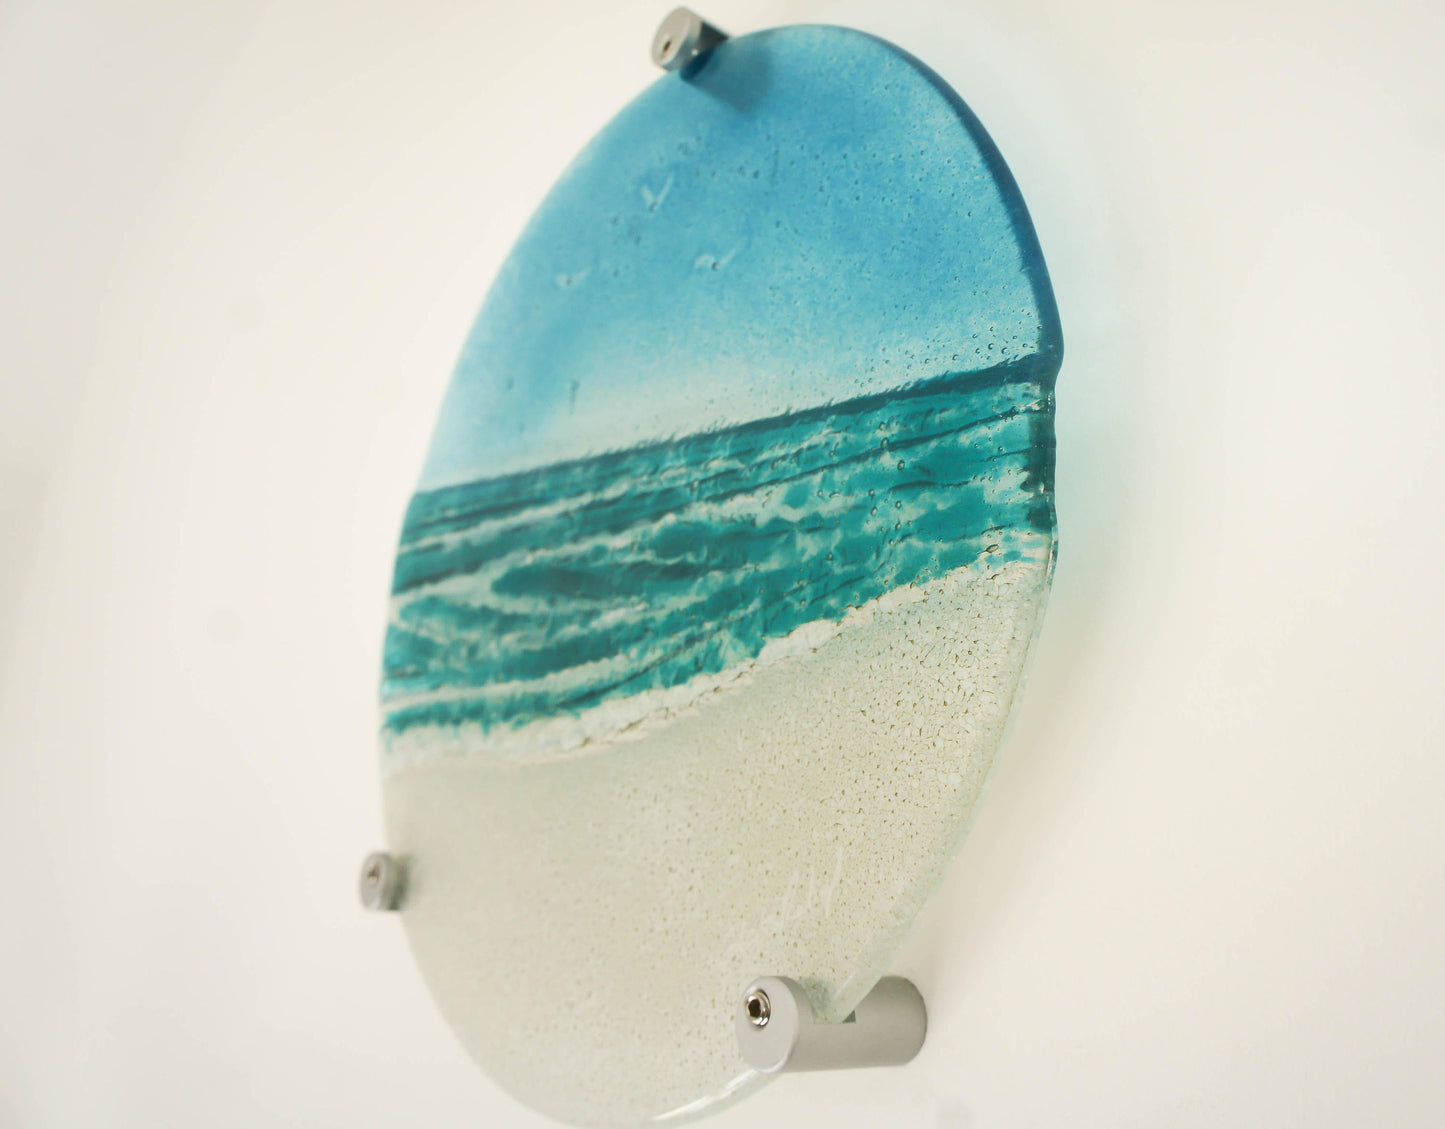 Turquoise Beach Panel - Round - 29cm (10 1/2") with fixings